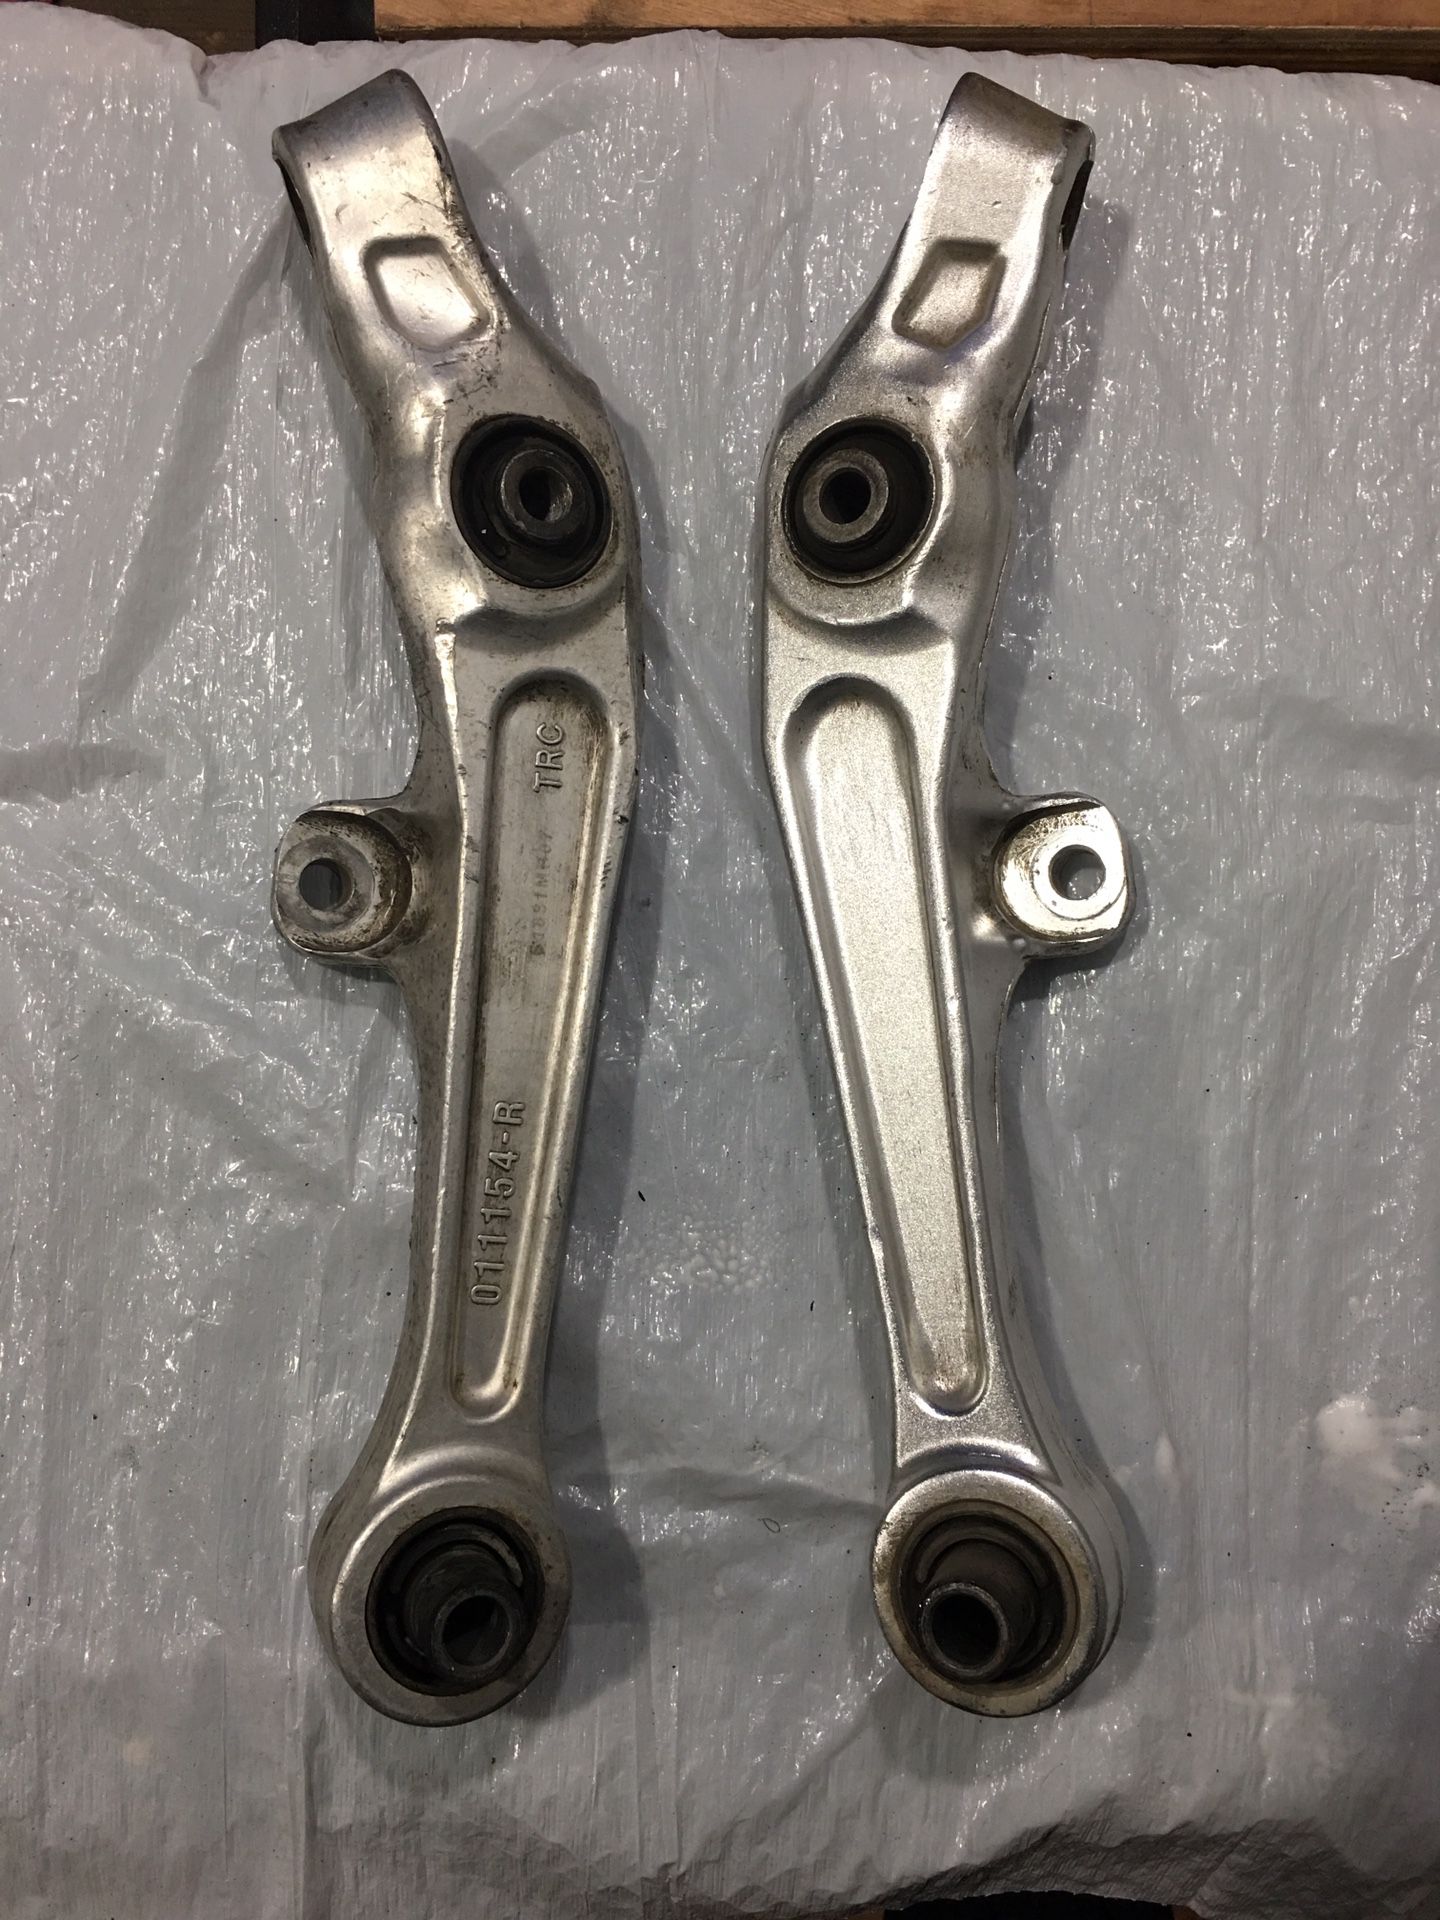 DISCOUNTED/SALE - Infiniti/Nissan Front LH/RH UPPER AND LOWER Control Arms Set (Suspension/Axle)